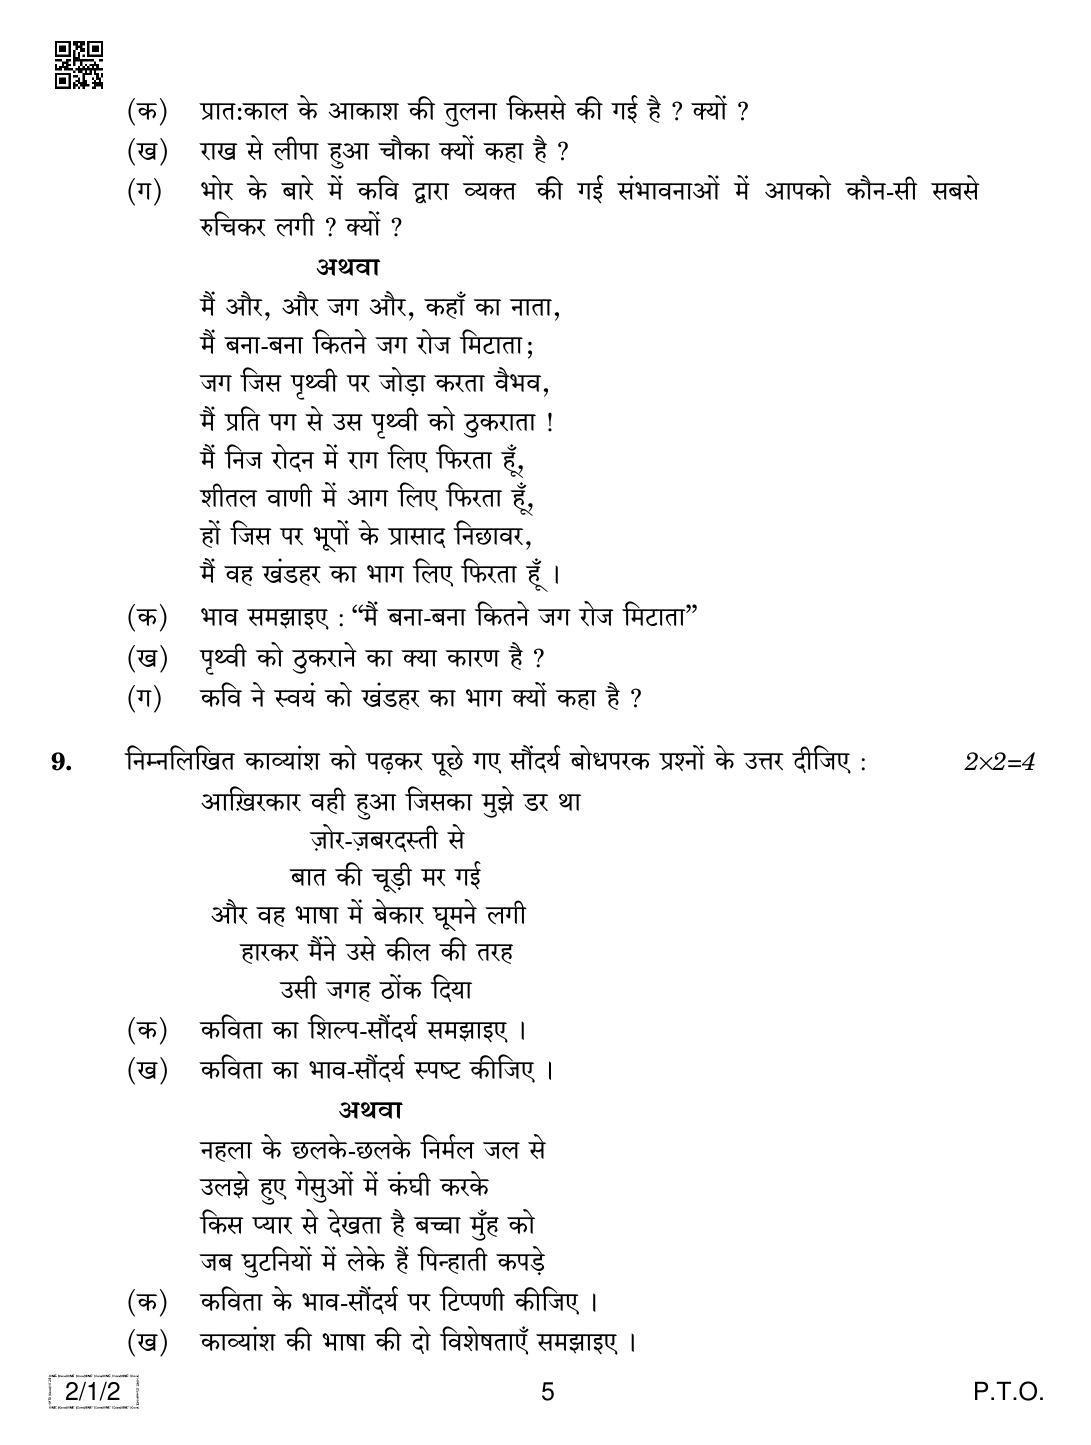 CBSE Class 12 2-1-2 HINDI CORE 2019 Compartment Question Paper - Page 5